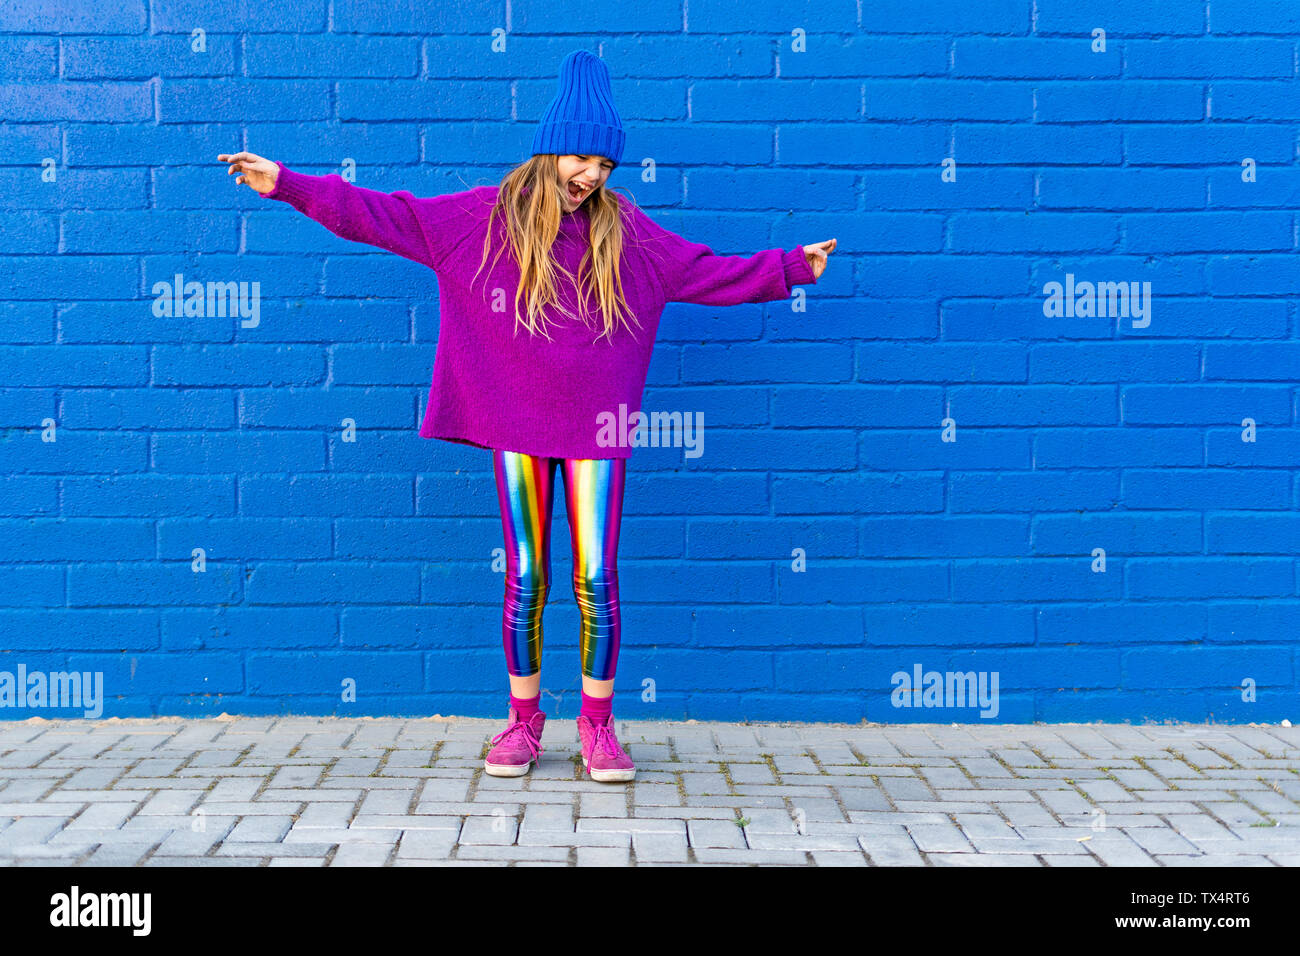 Girl wearing blue cap and oversized pink pullover standing in front of blue wall singing Stock Photo